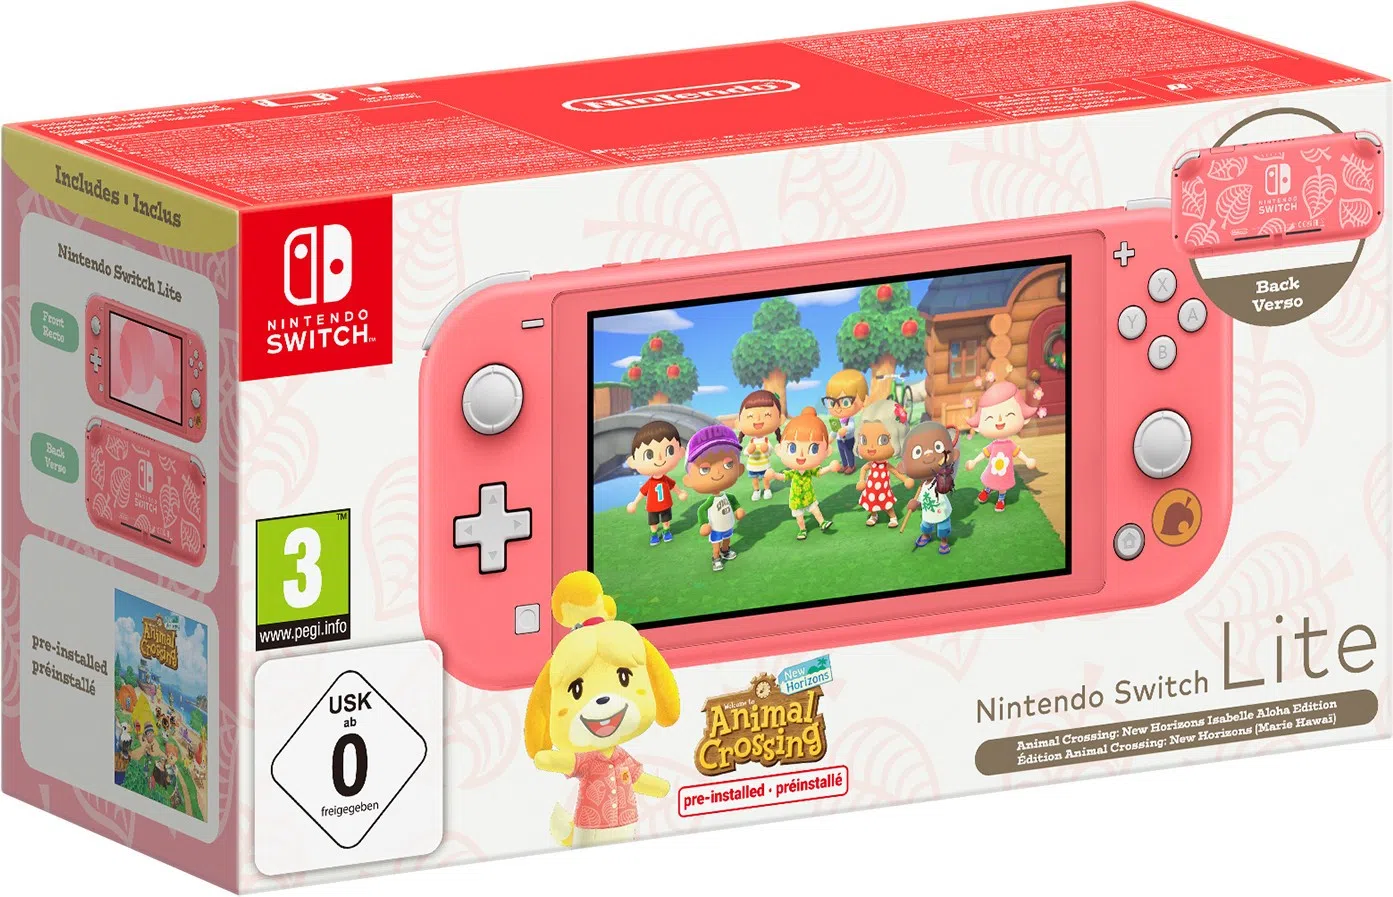 Nintendo Switch Lite Console - Coral Animal Crossing Isabelle's Aloha Limited Edition